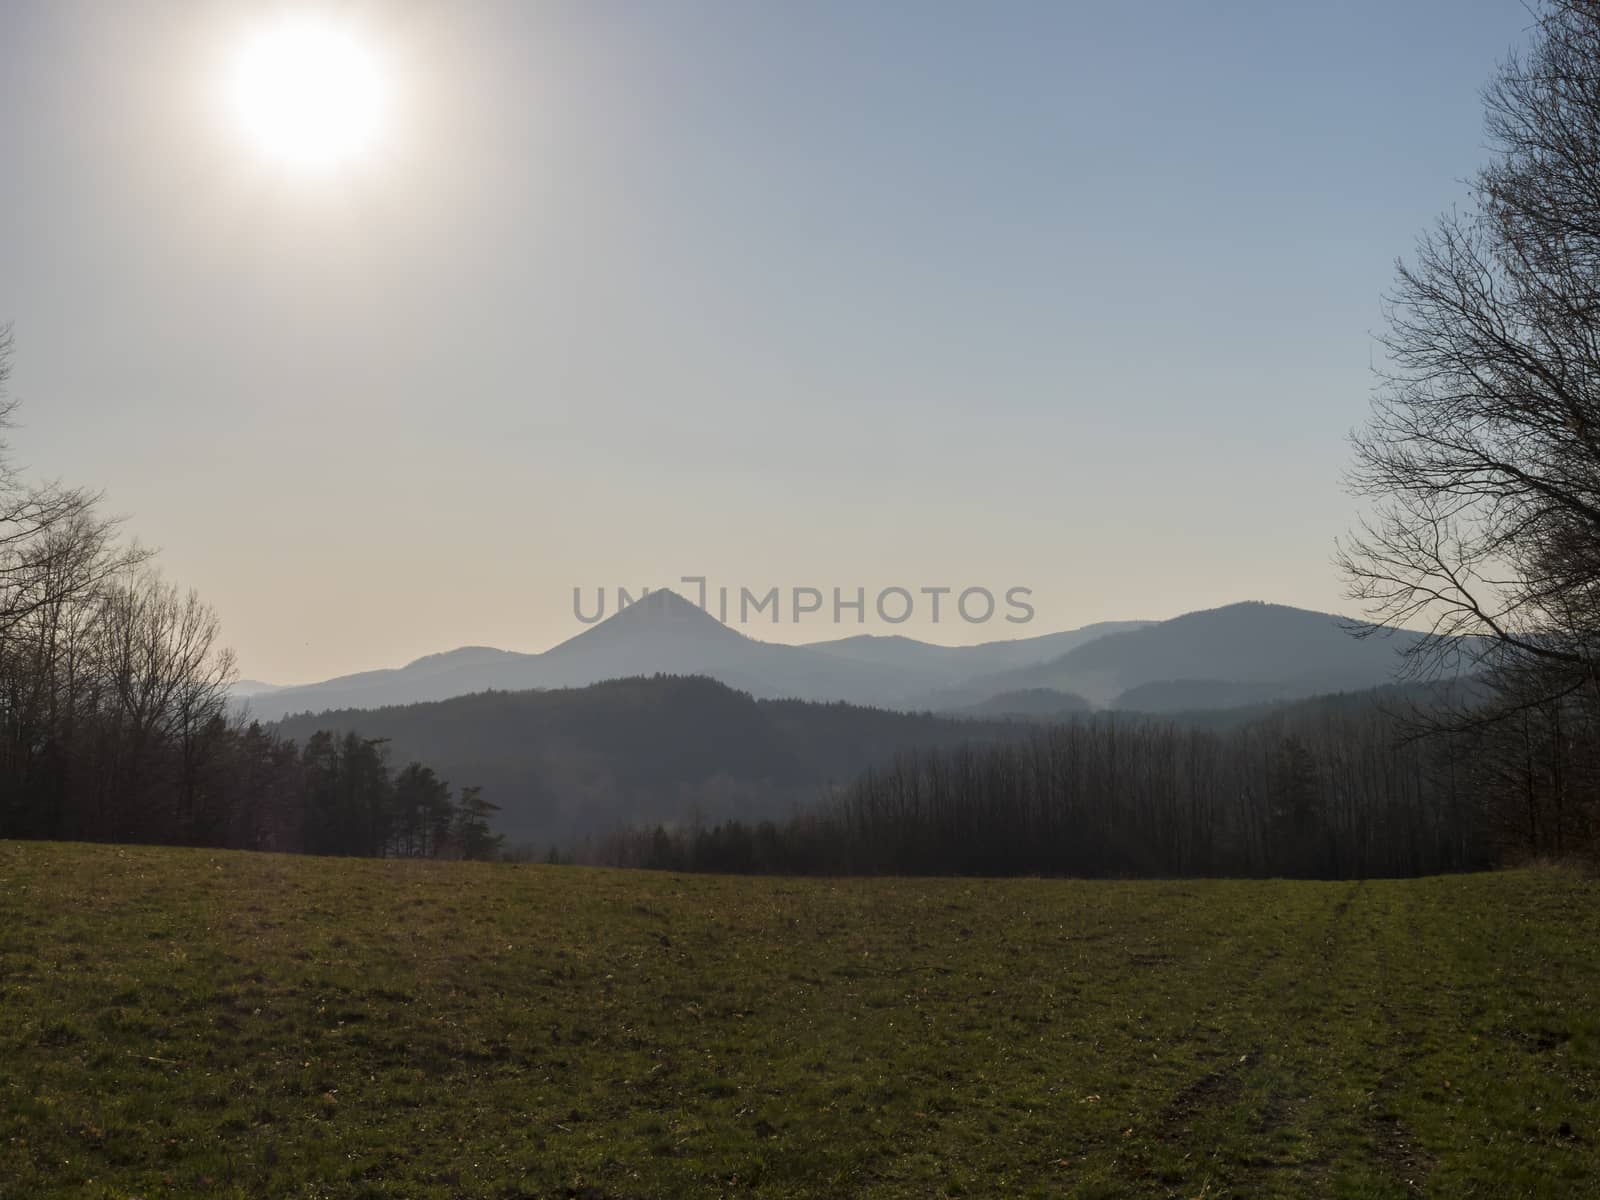 early spring landscape at Lusatian mountains, with view point hill klic, grass meadow, bare trees, deciduous and spruce tree forest, clear blue sky background, golden hour light, horizontal, copy space by Henkeova